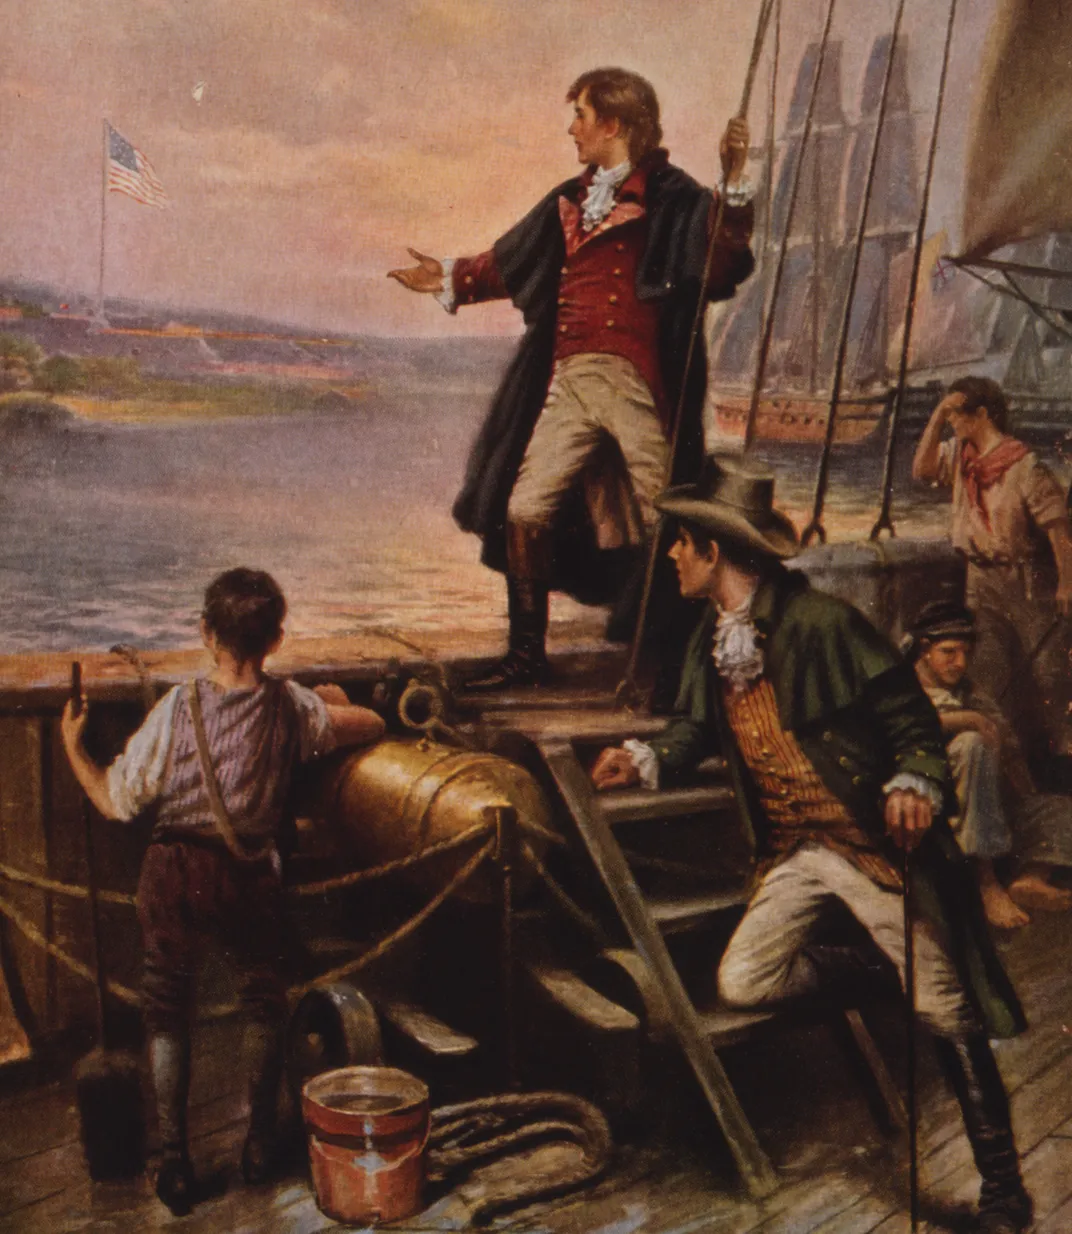 A 1912 painting of Francis Scott Key observing the American flag on the morning after the Battle of Baltimore